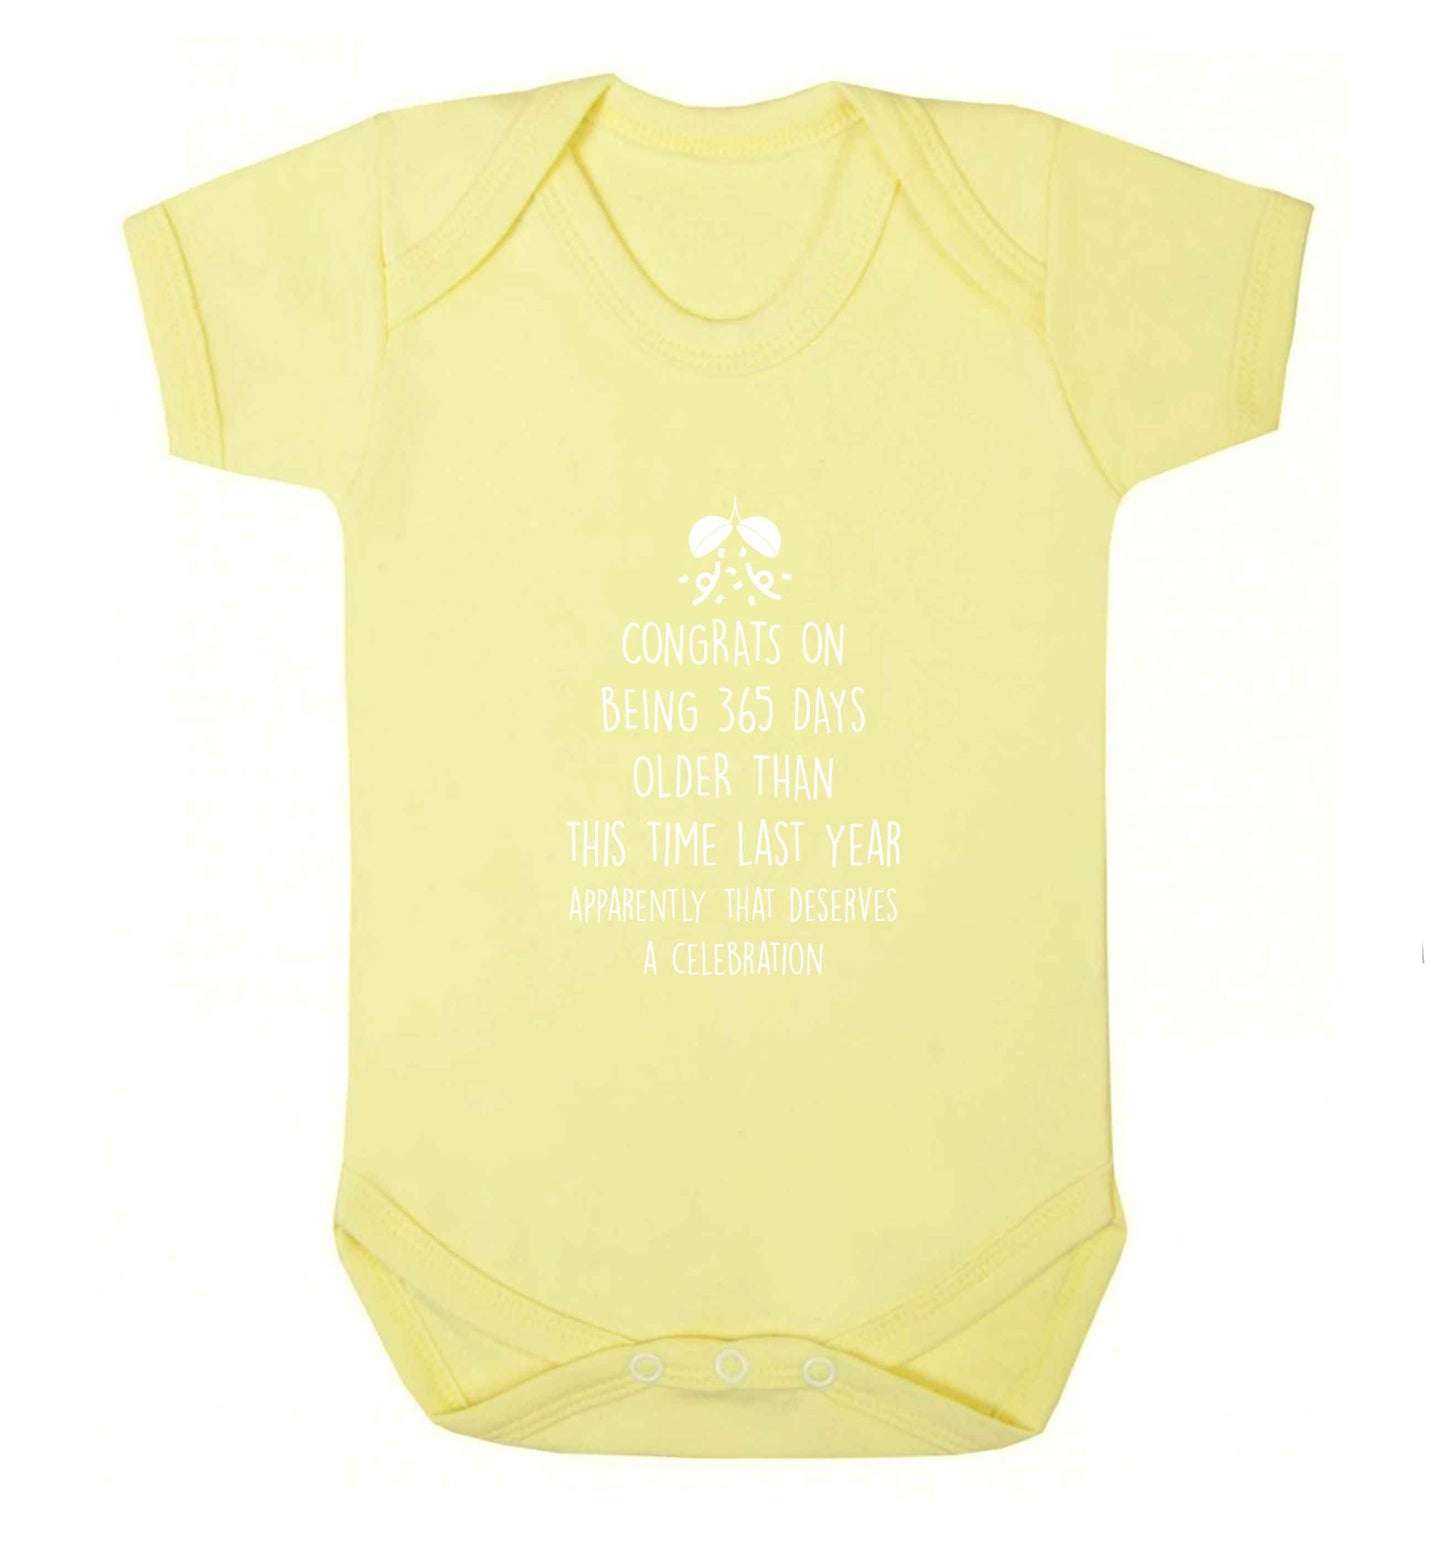 Congrats on being 365 days older than you were this time last year apparently that deserves a celebration baby vest pale yellow 18-24 months